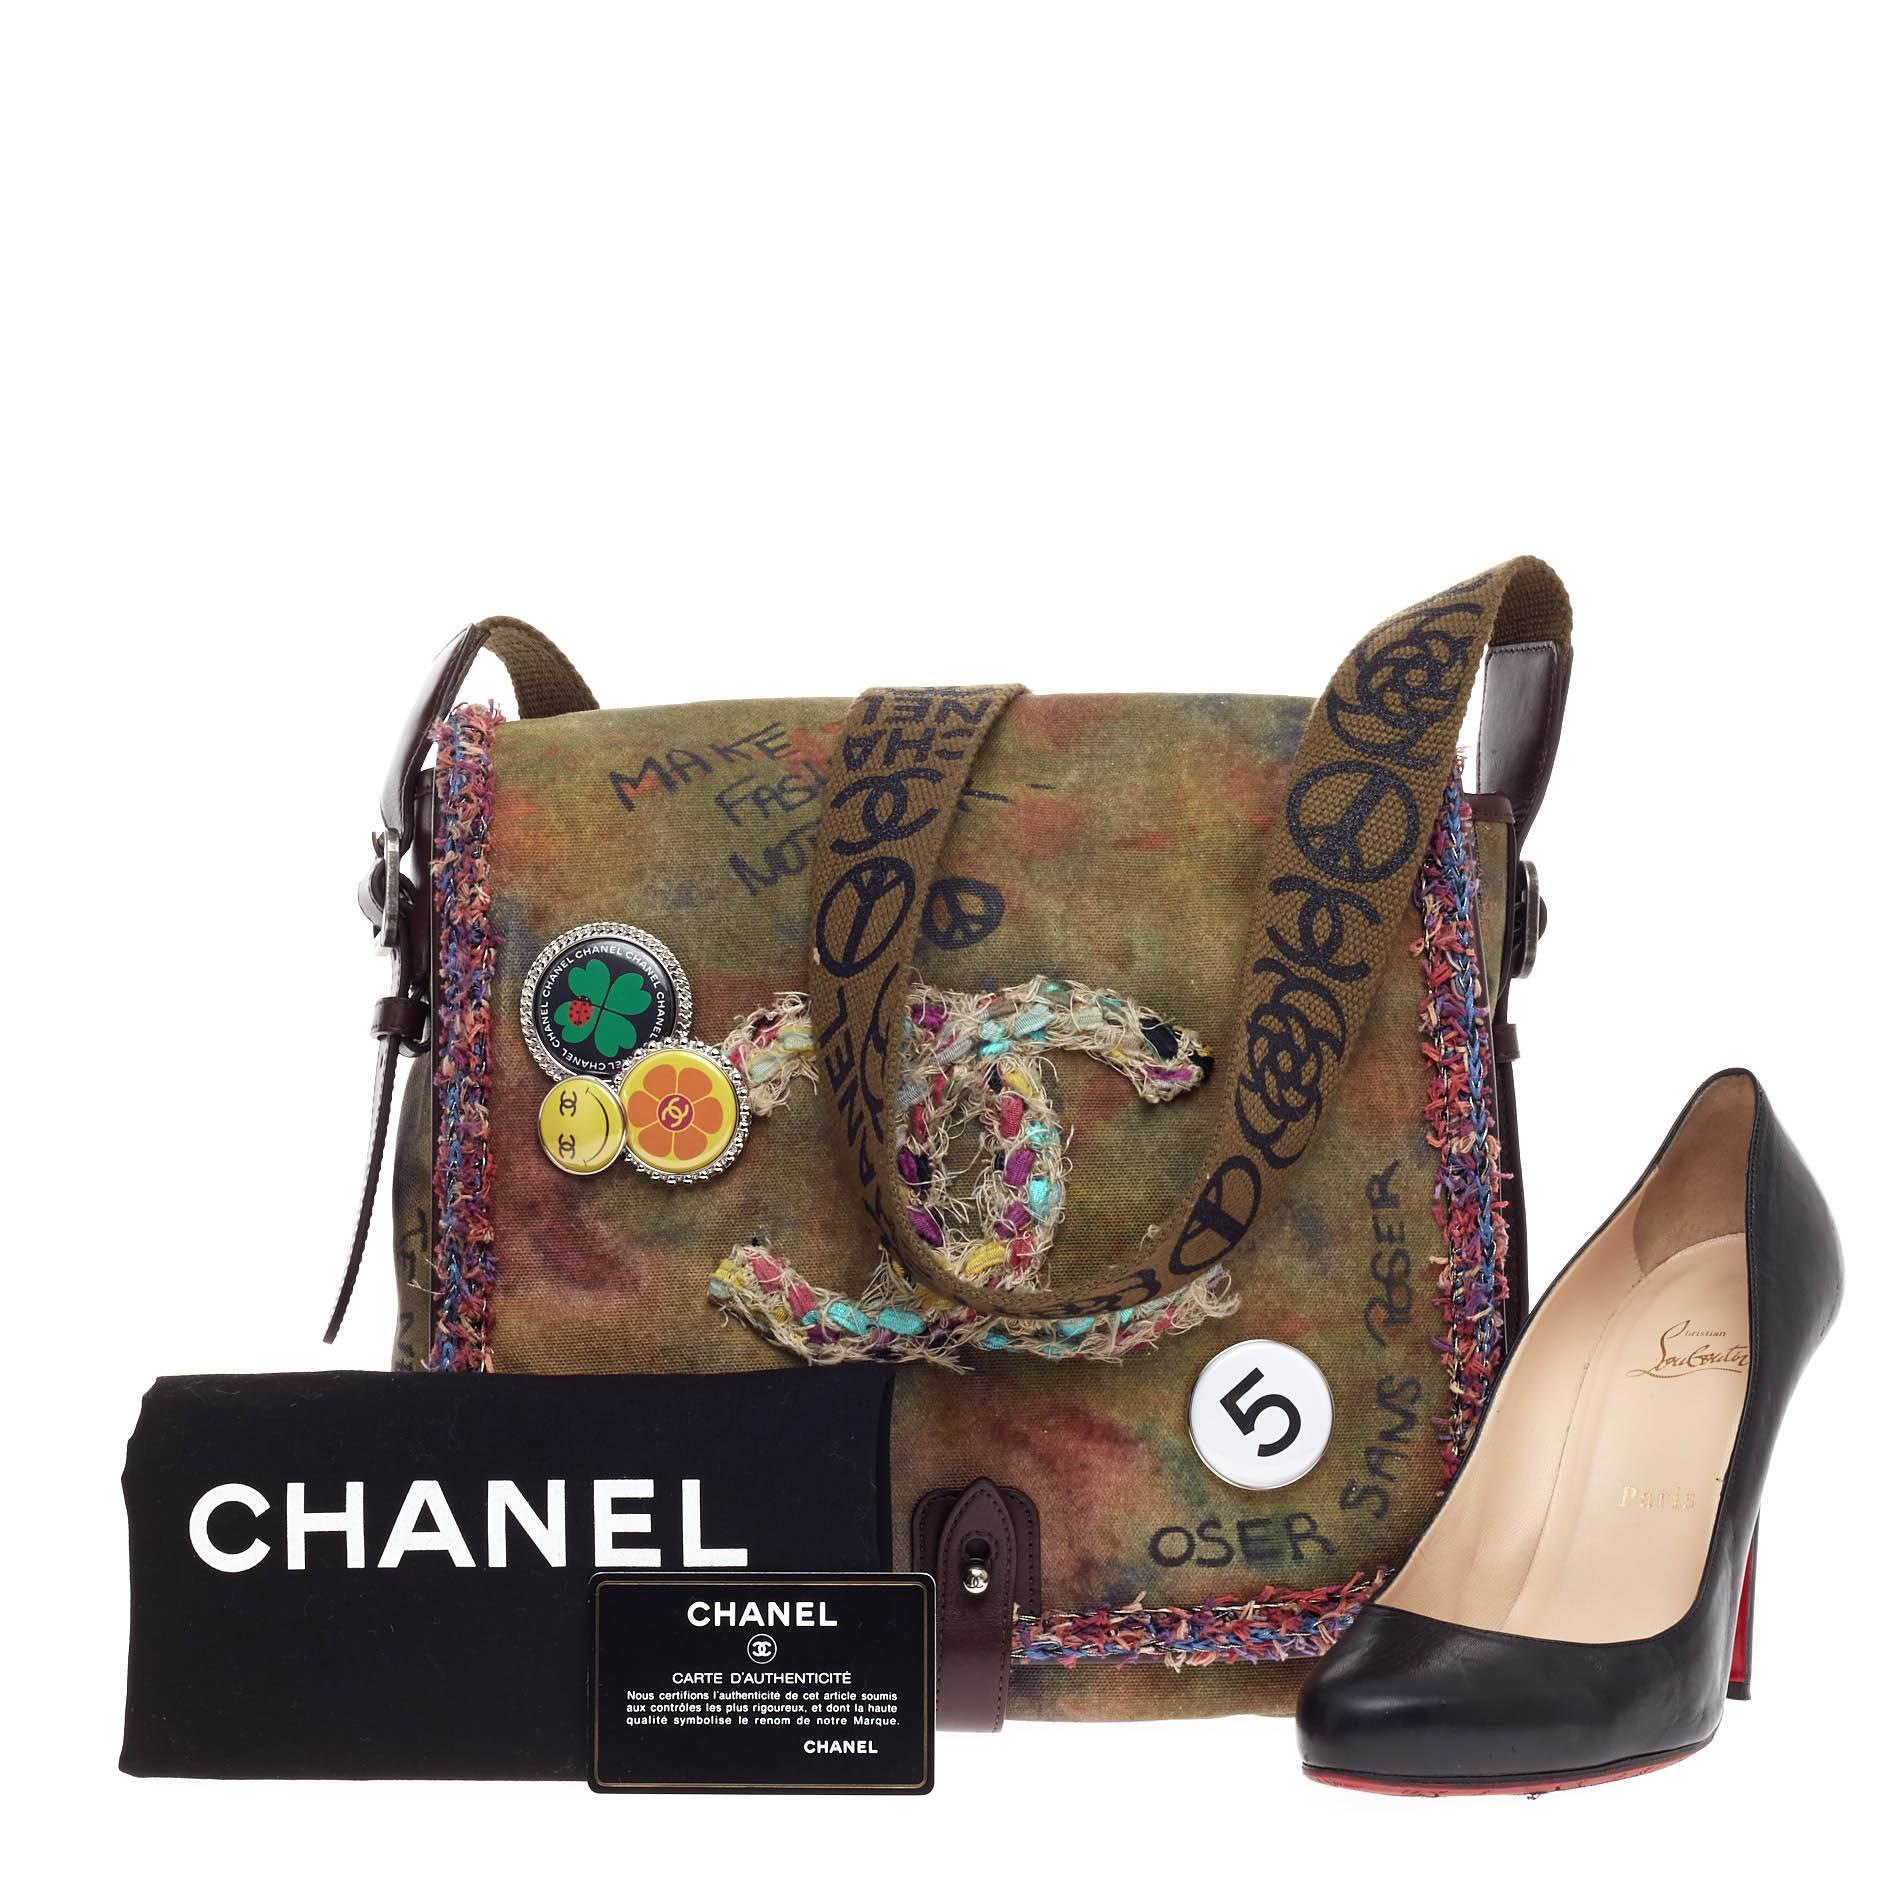 This authentic Chanel On The Pavement Graffiti Messenger Canvas Small presented in the brand's Spring/Summer 2015 Collection exudes contemporary styling with a unique, 70s-inspired twist. Constructed from khaki washed canvas with a hand-written